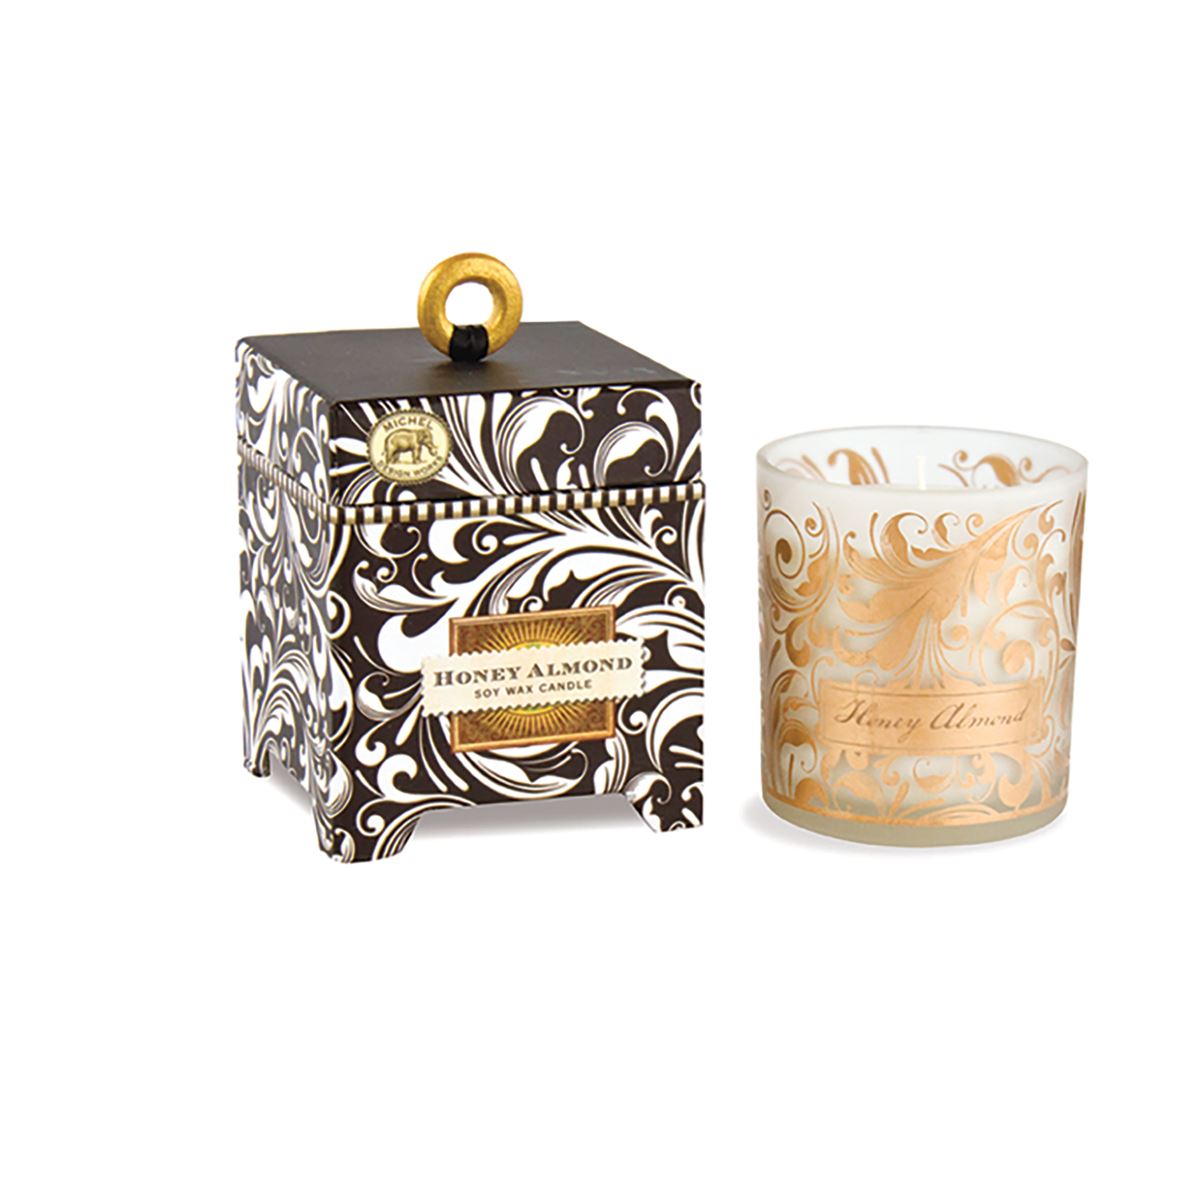 HONEY ALMOND 6.5 WAX CANDLE - Molly's! A Chic and Unique Boutique 